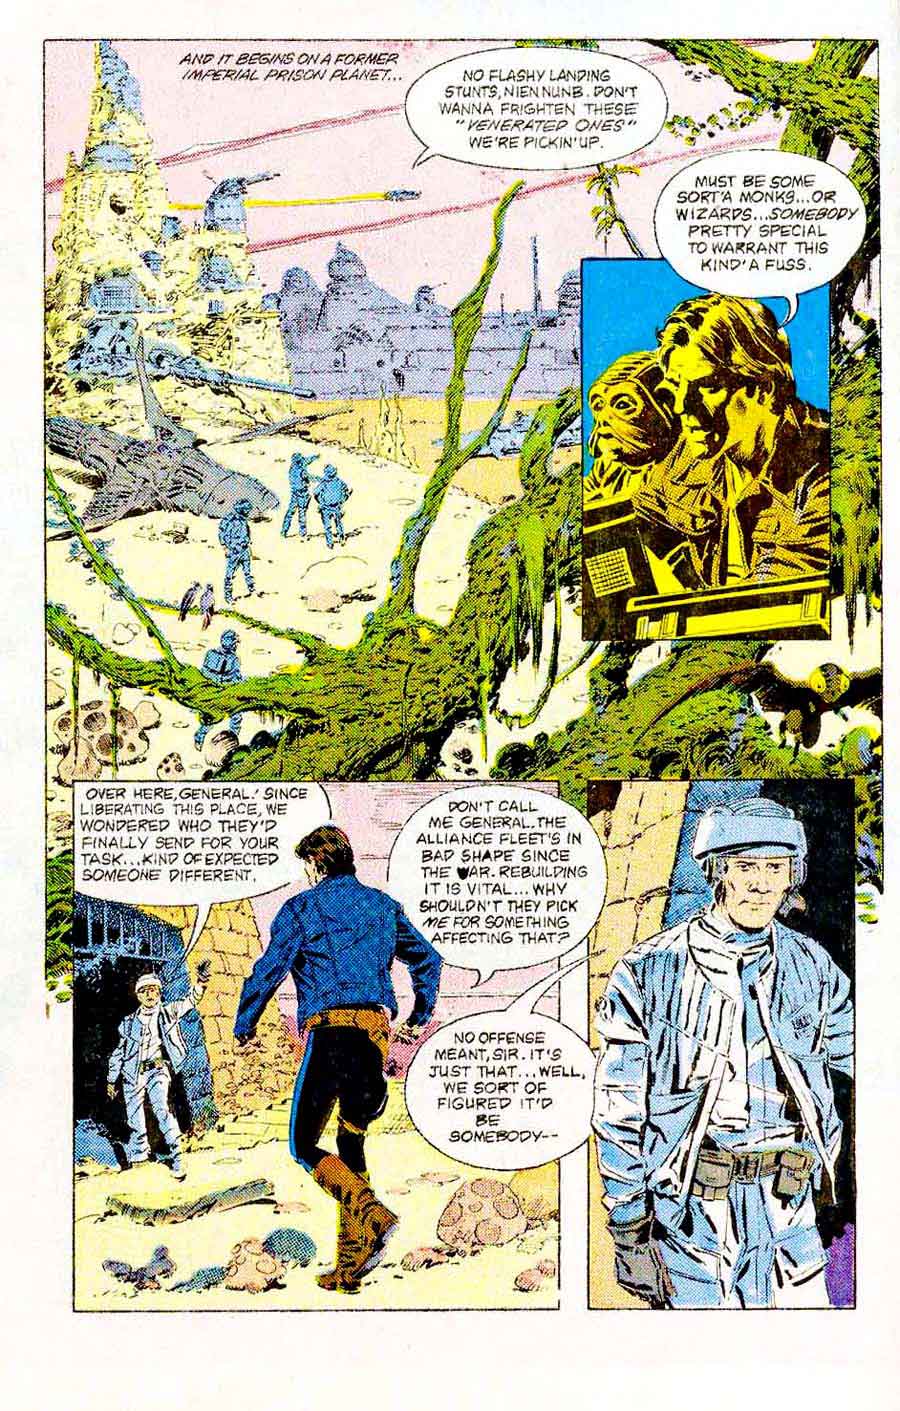 Star Wars #98 marvel 1980s science fiction comic book page art by Al Williamson